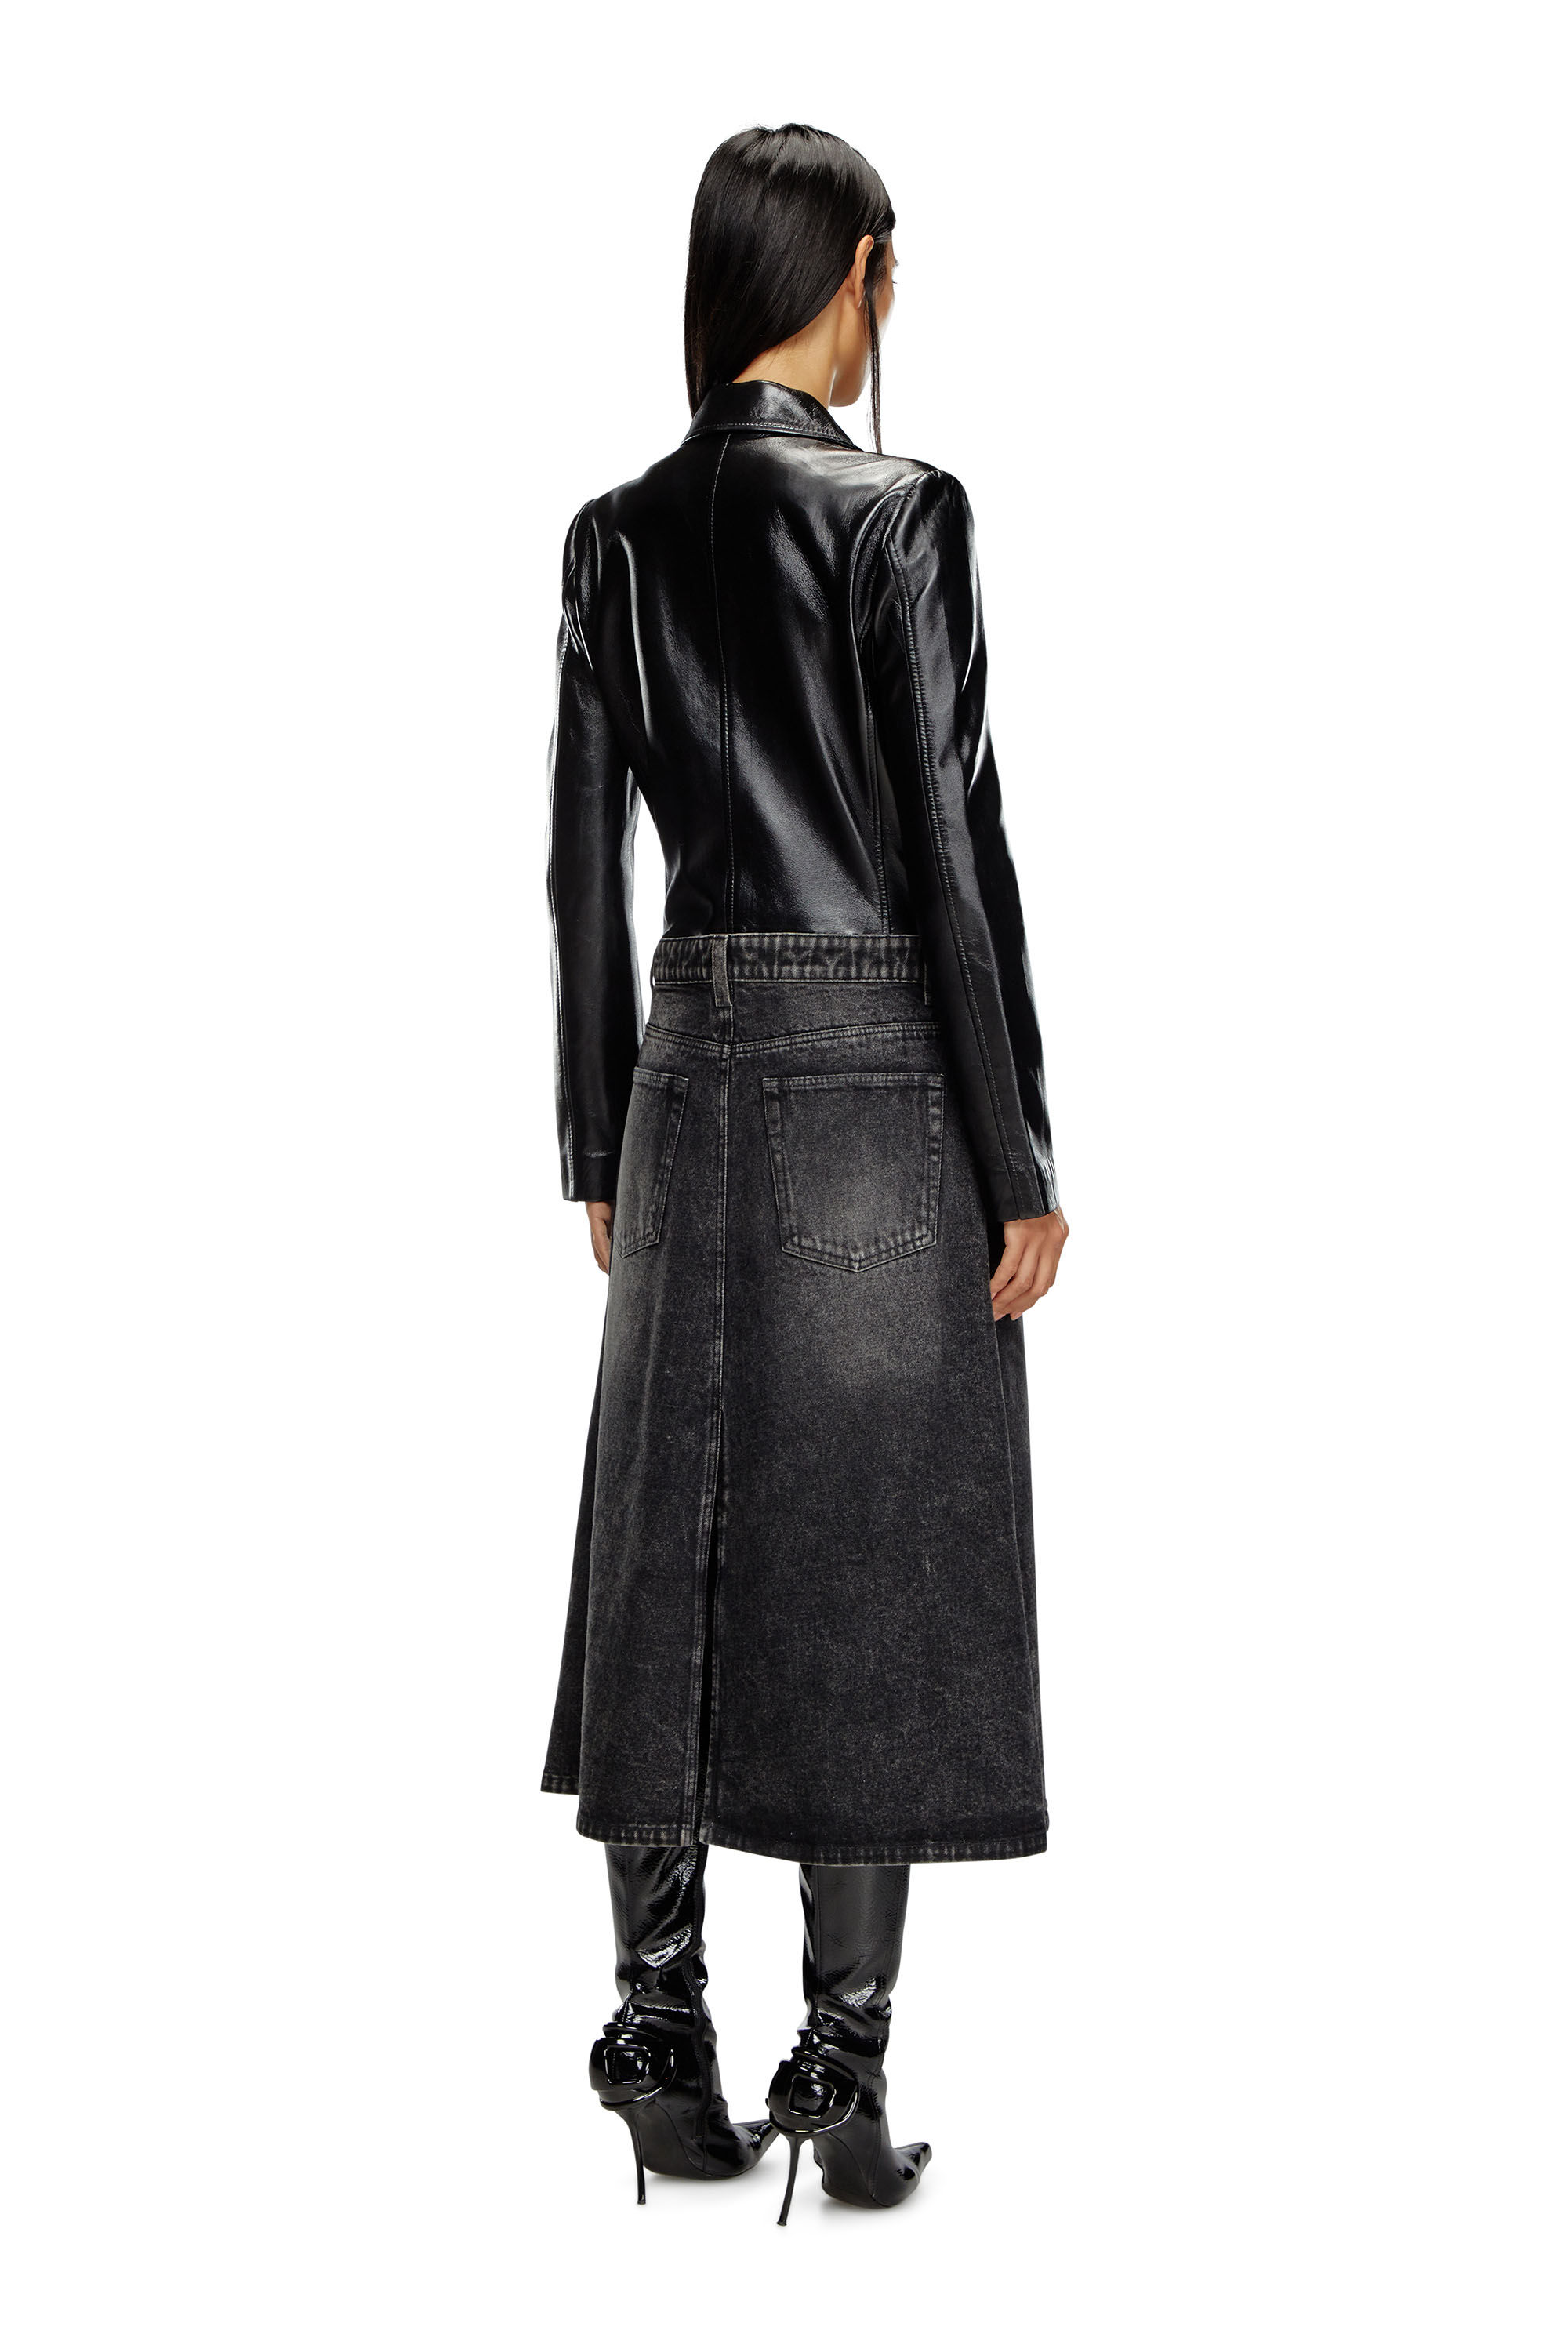 Diesel - L-ORY, Female Hybrid coat in denim and leather in ブラック - Image 5